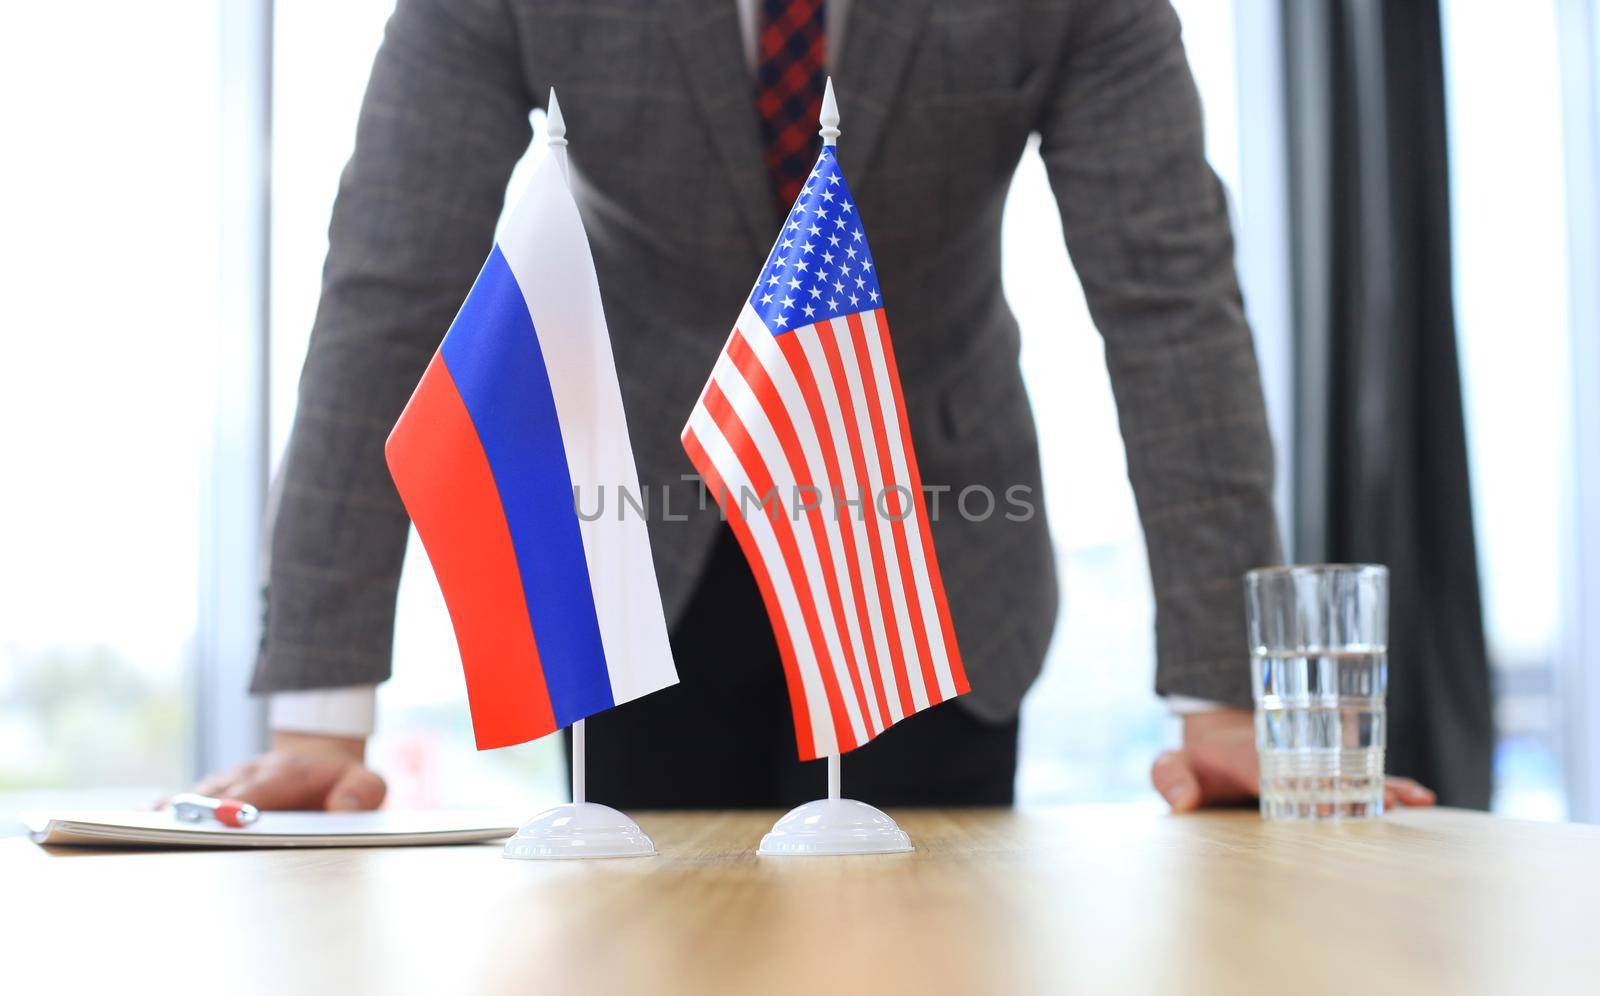 Russian flag and flag of European Union with businessman near by by tsyhun